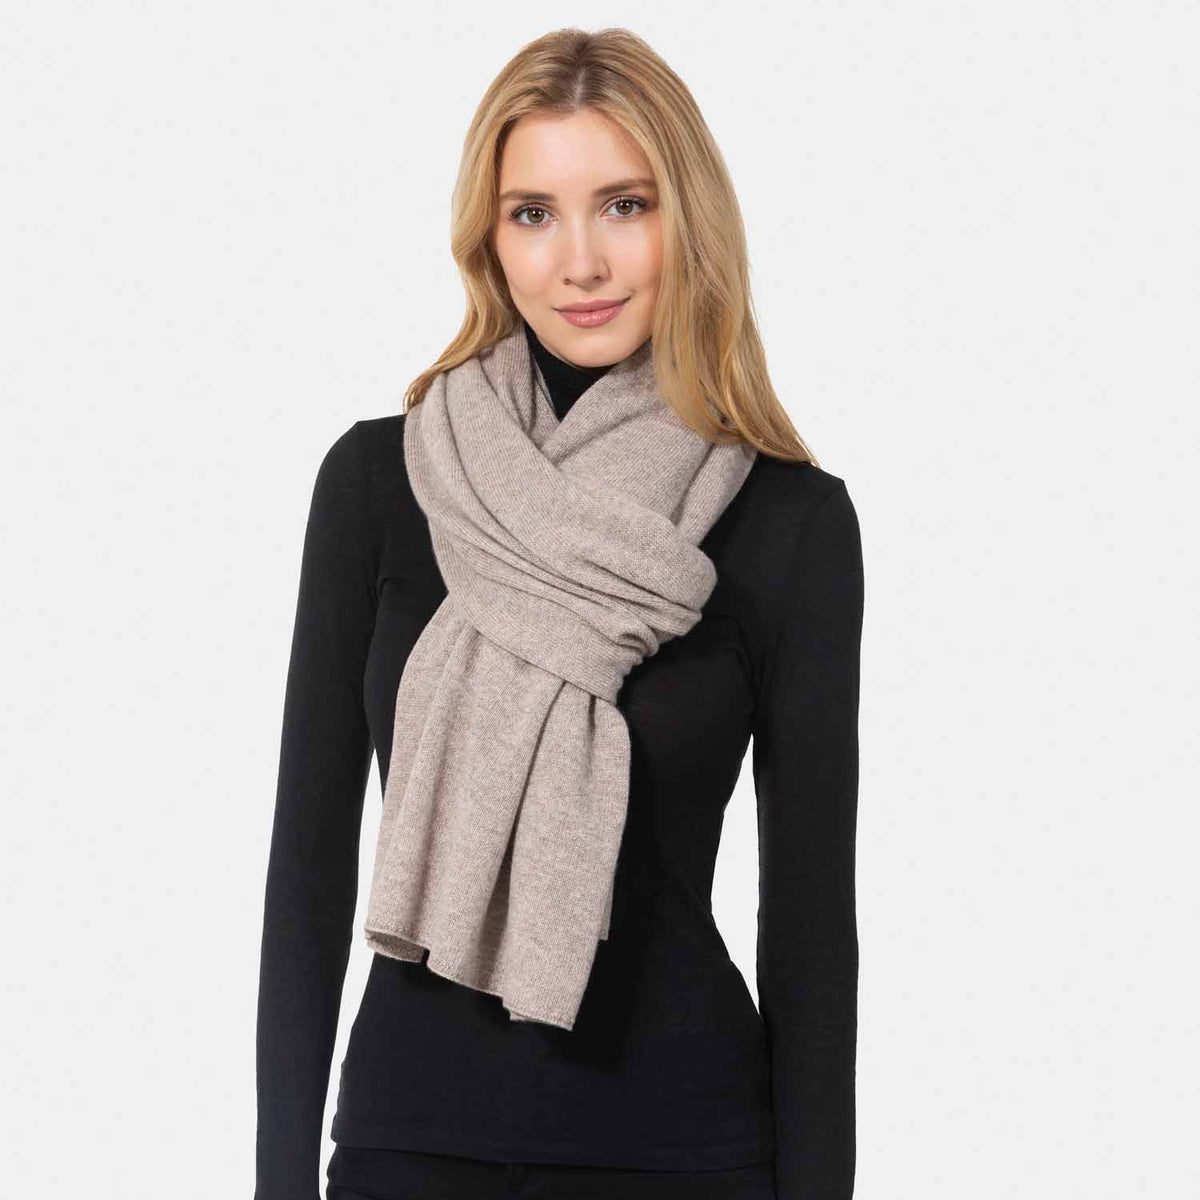 Picture of a woman wearing an oatmeal cashmere jersey knitted oversize scarf or travel wrap.